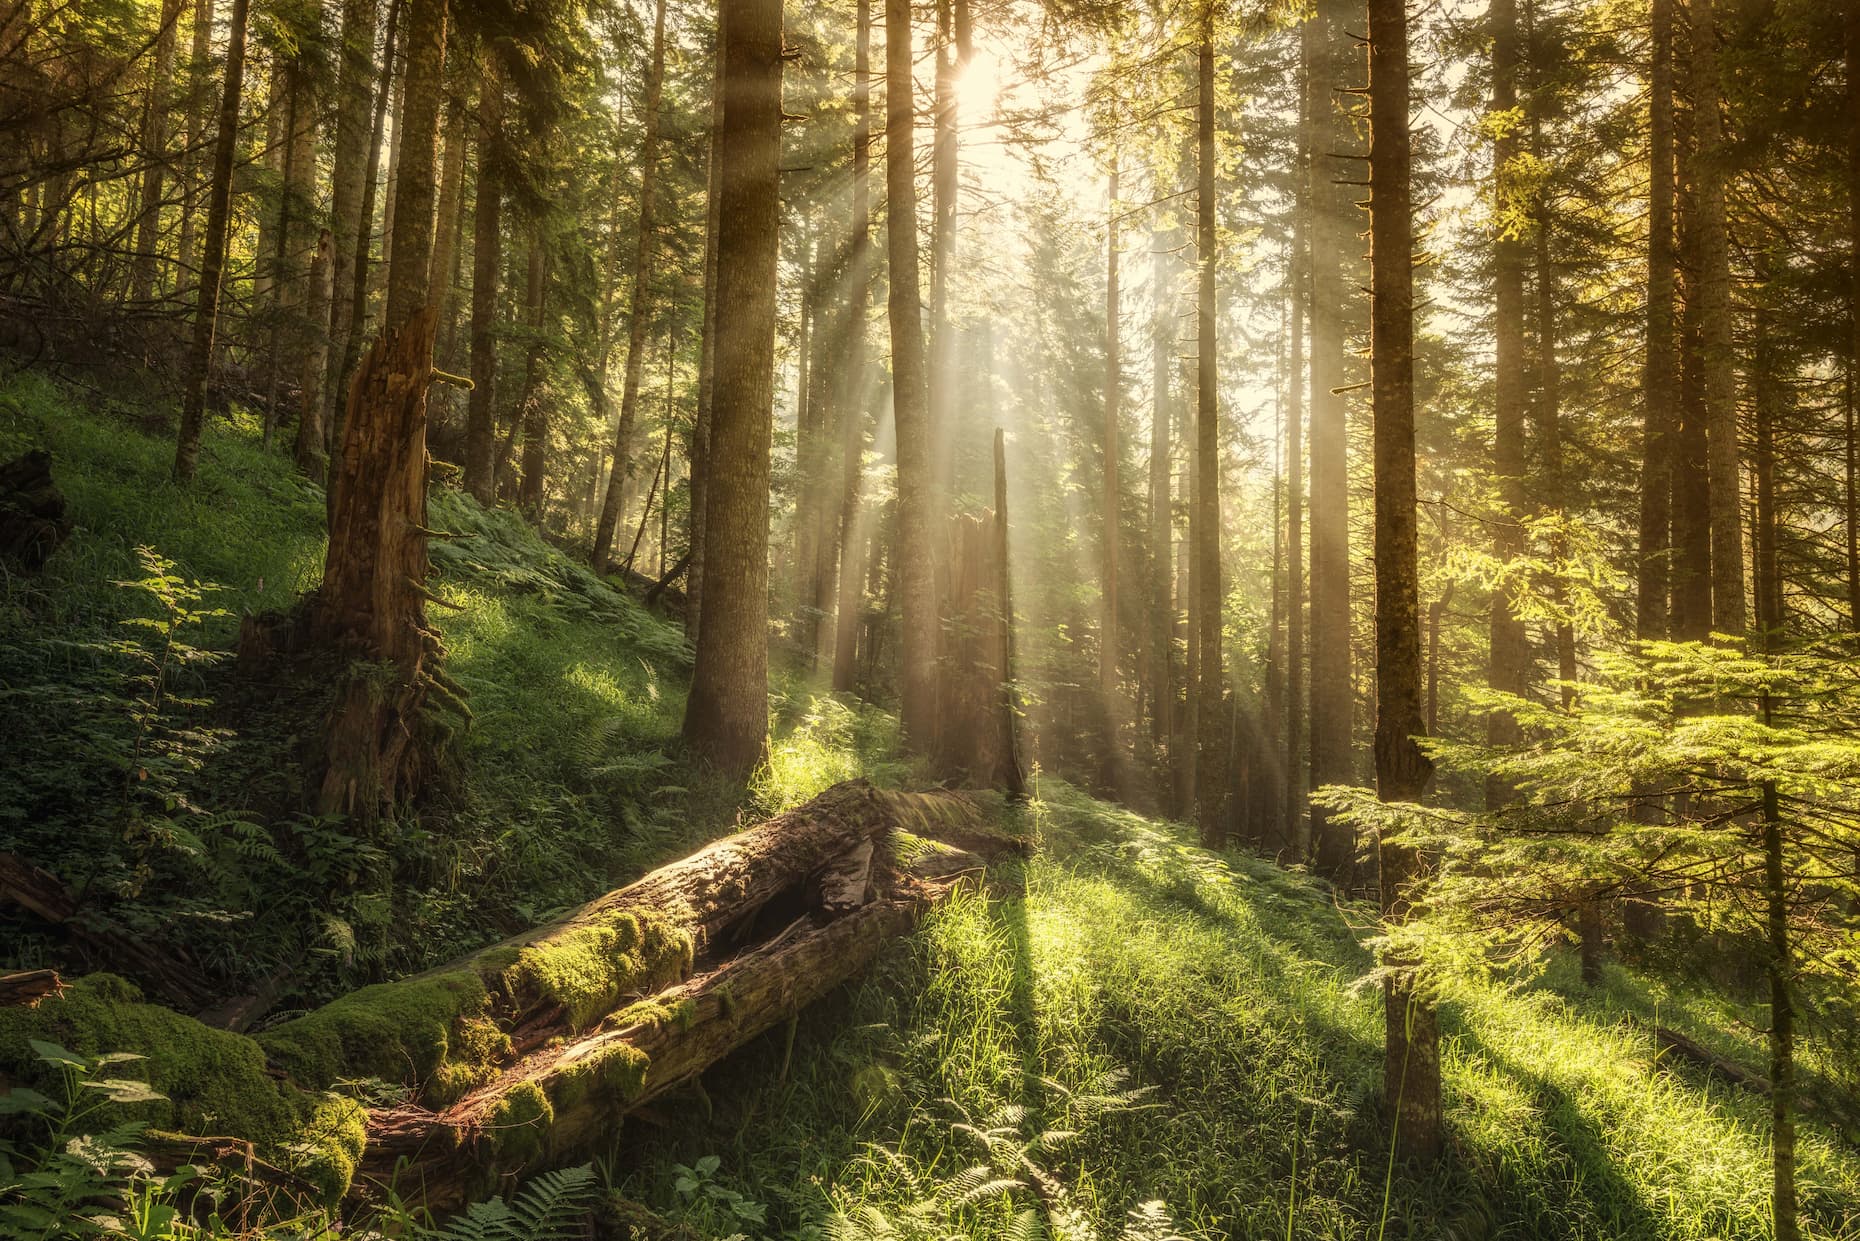 Sun hitting wood in a forest